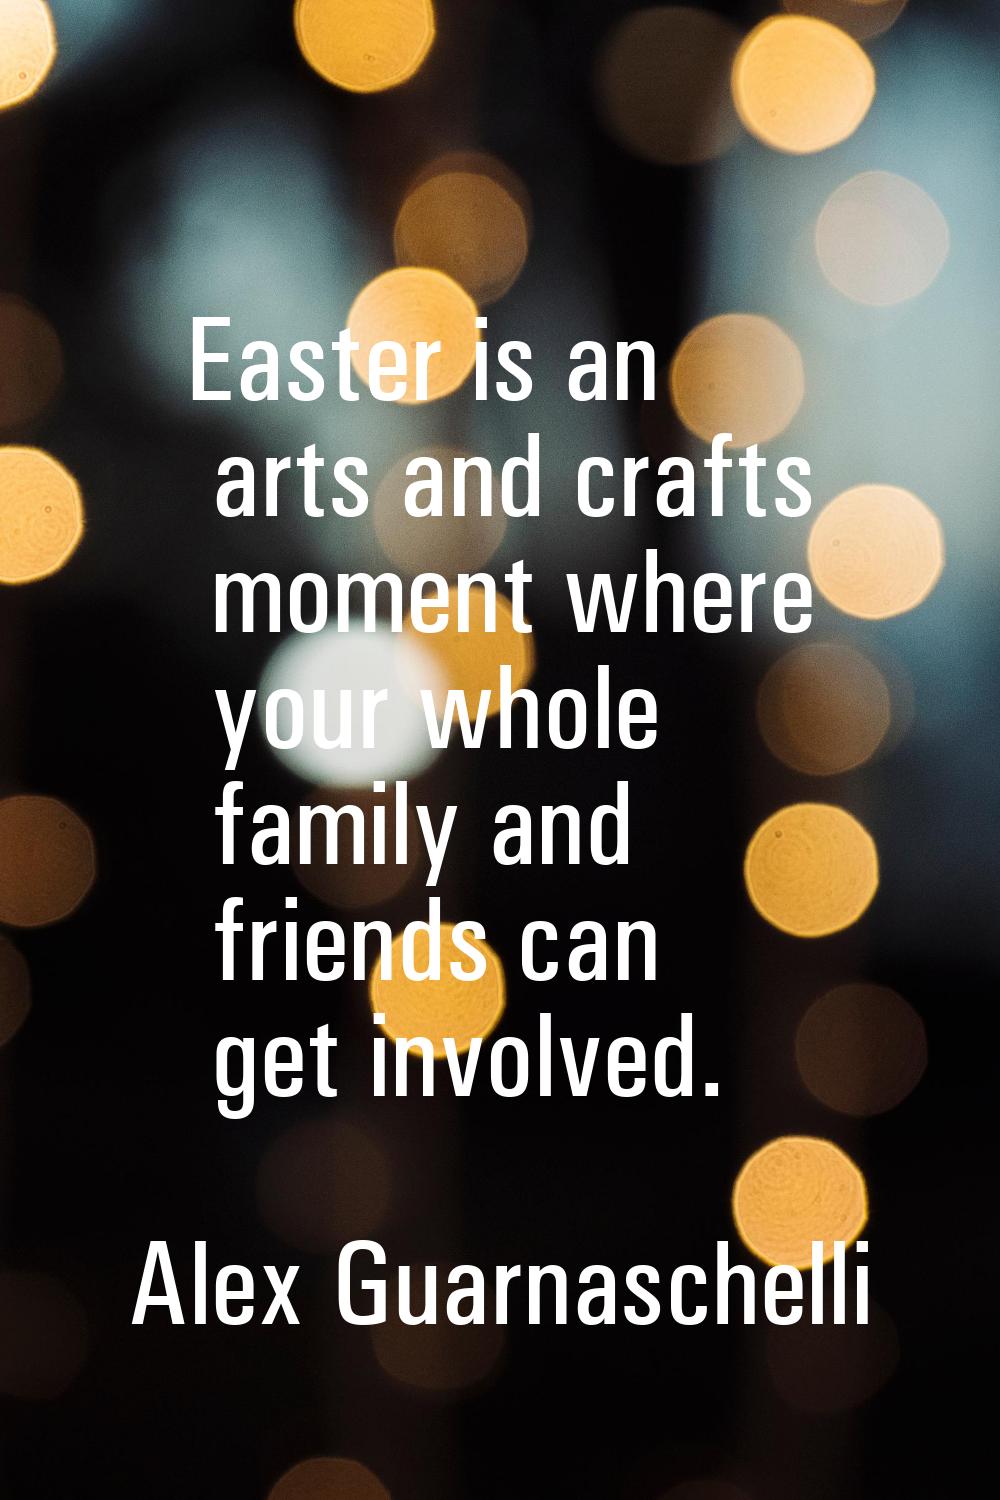 Easter is an arts and crafts moment where your whole family and friends can get involved.